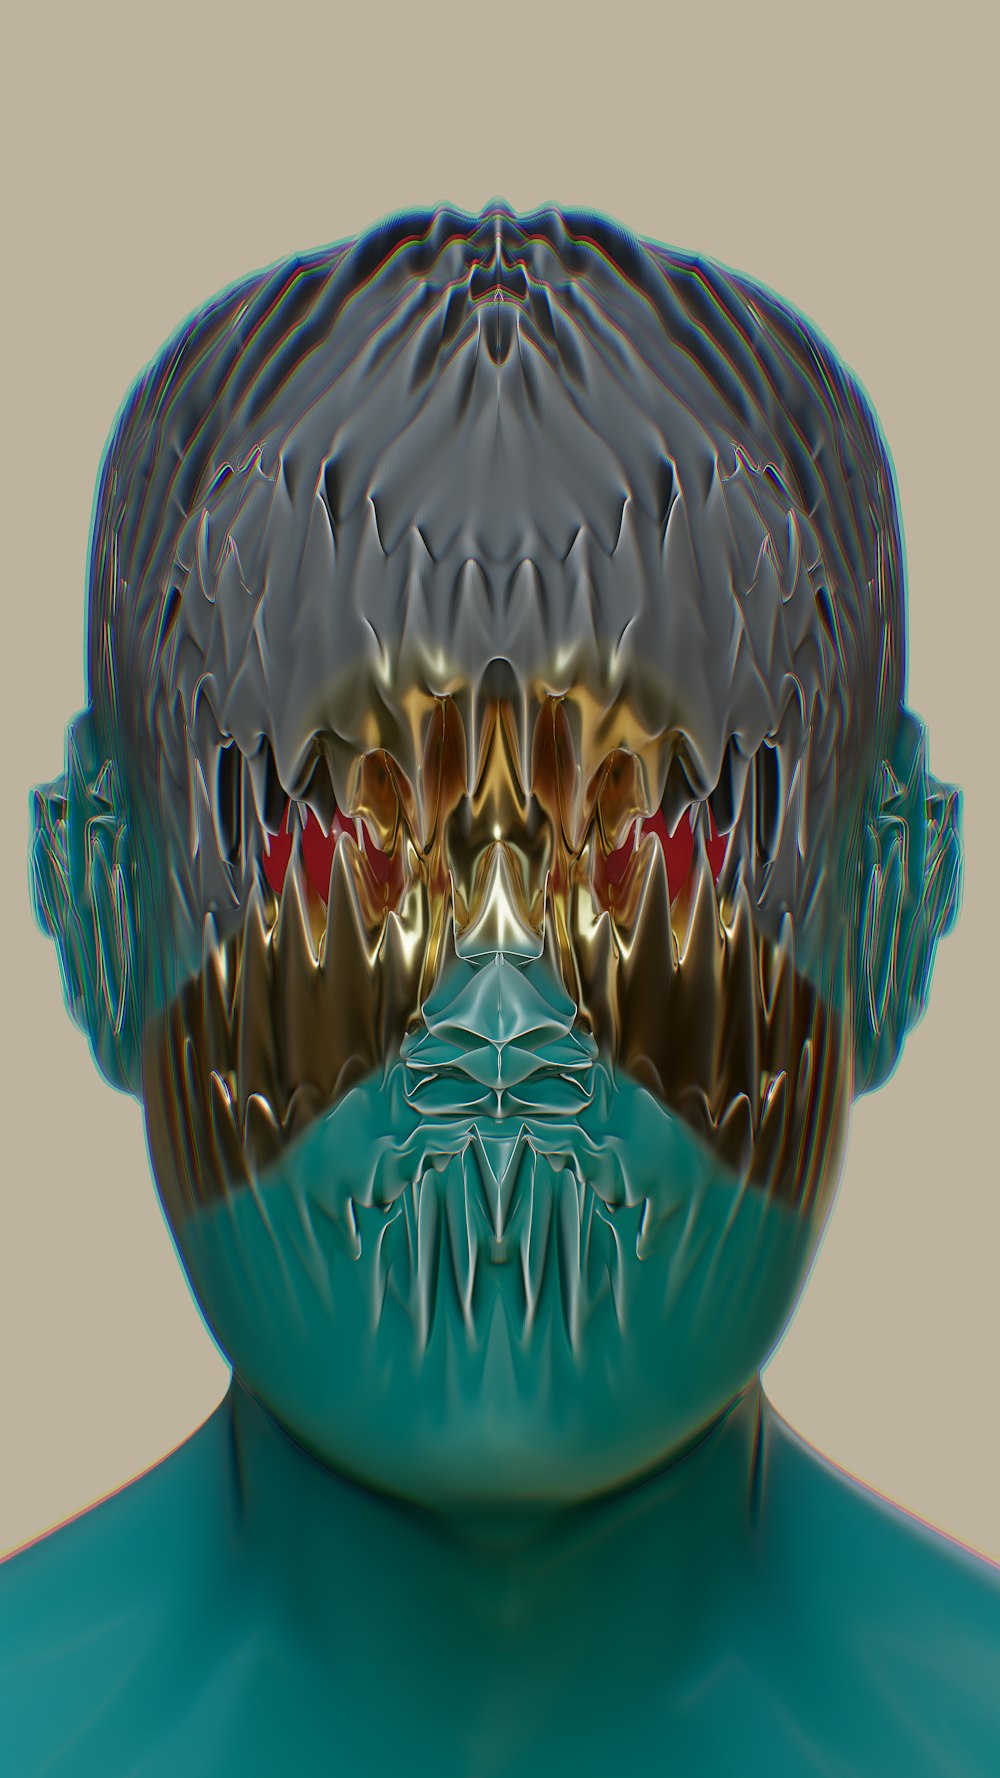 a computer generated image of a man's face and neck